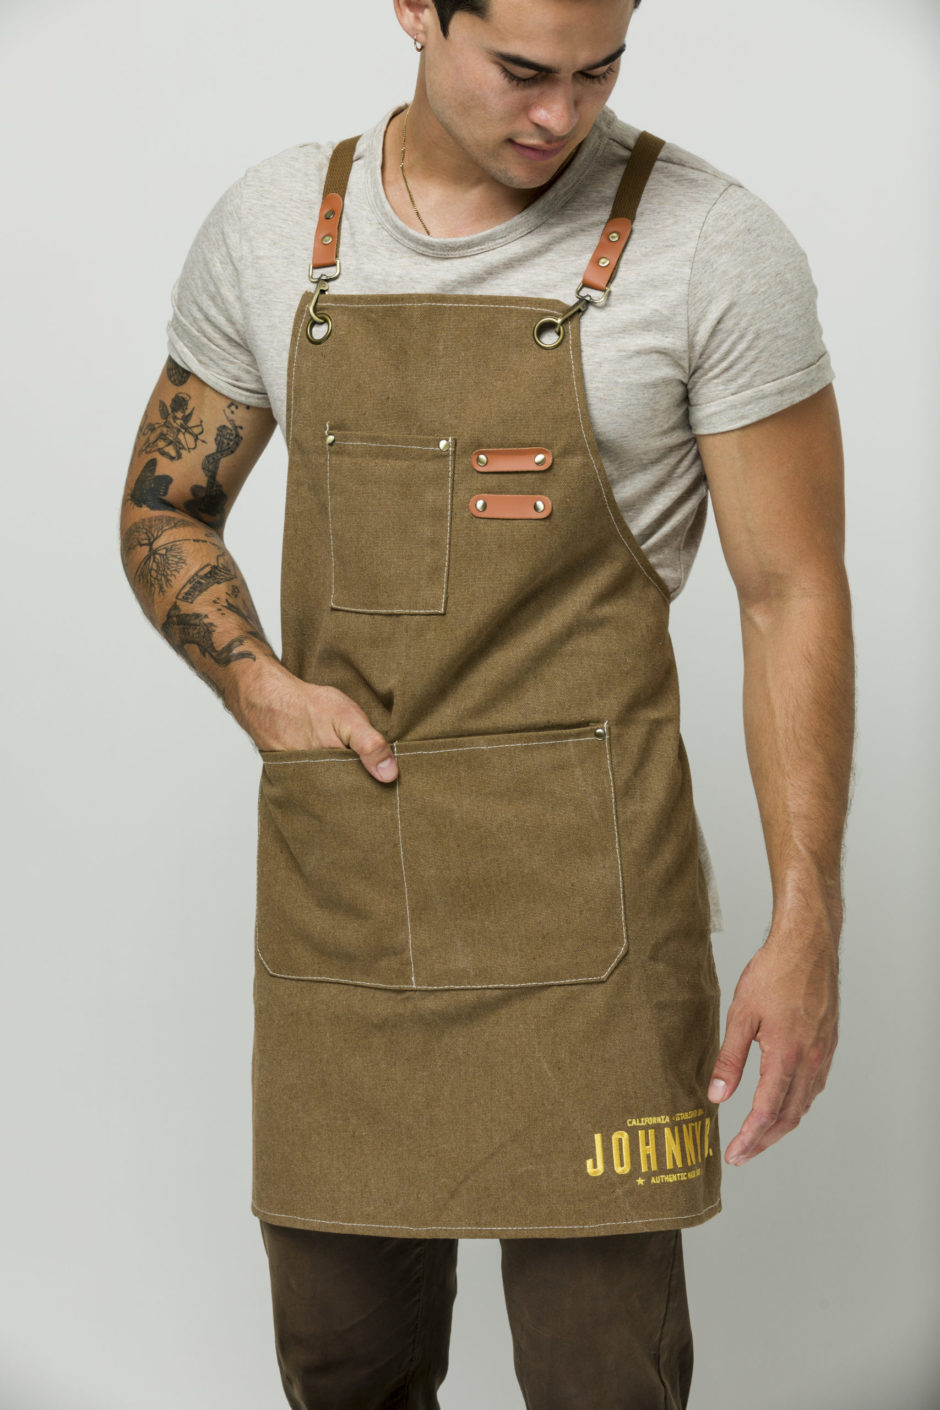 Front details of brown work apron